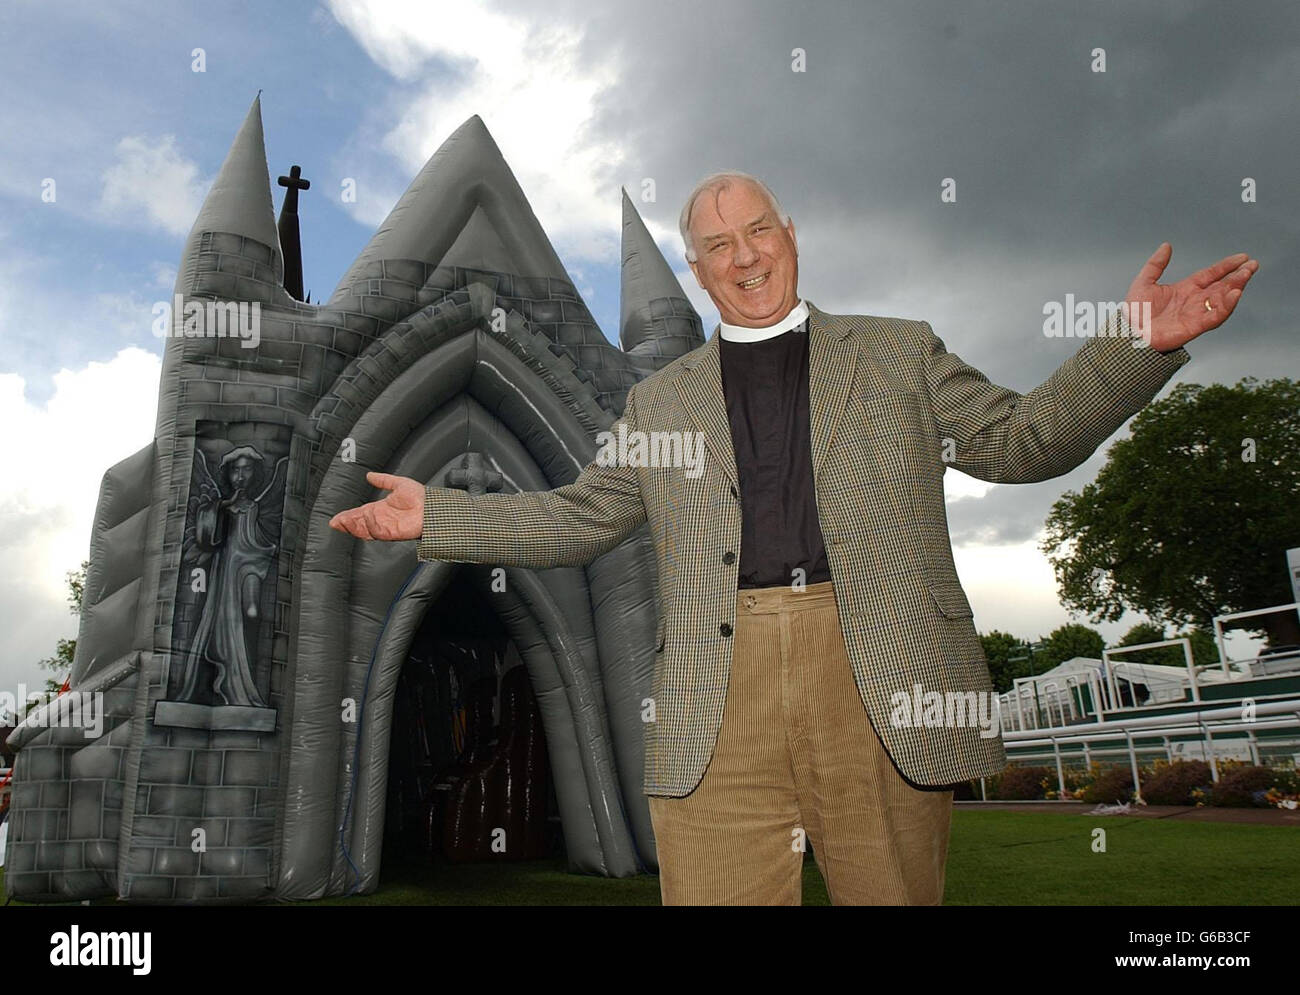 Vicar Chris Keating from All Saints church in Good Meyes, Essex, stands by the world's first inflatible church which went on display , at the Christian Resources Exhibition at Sandown Park Exhibition Centre, Surrey. The PVC church, which is 47ft high from ground to steeple, *..47ft long and 25ft wide, resembles a giant bouncy castle, holds around 60 people standing and includes a blow-up organ, altar, pulpit, pews, candles and 'stained glass' windows. Stock Photo